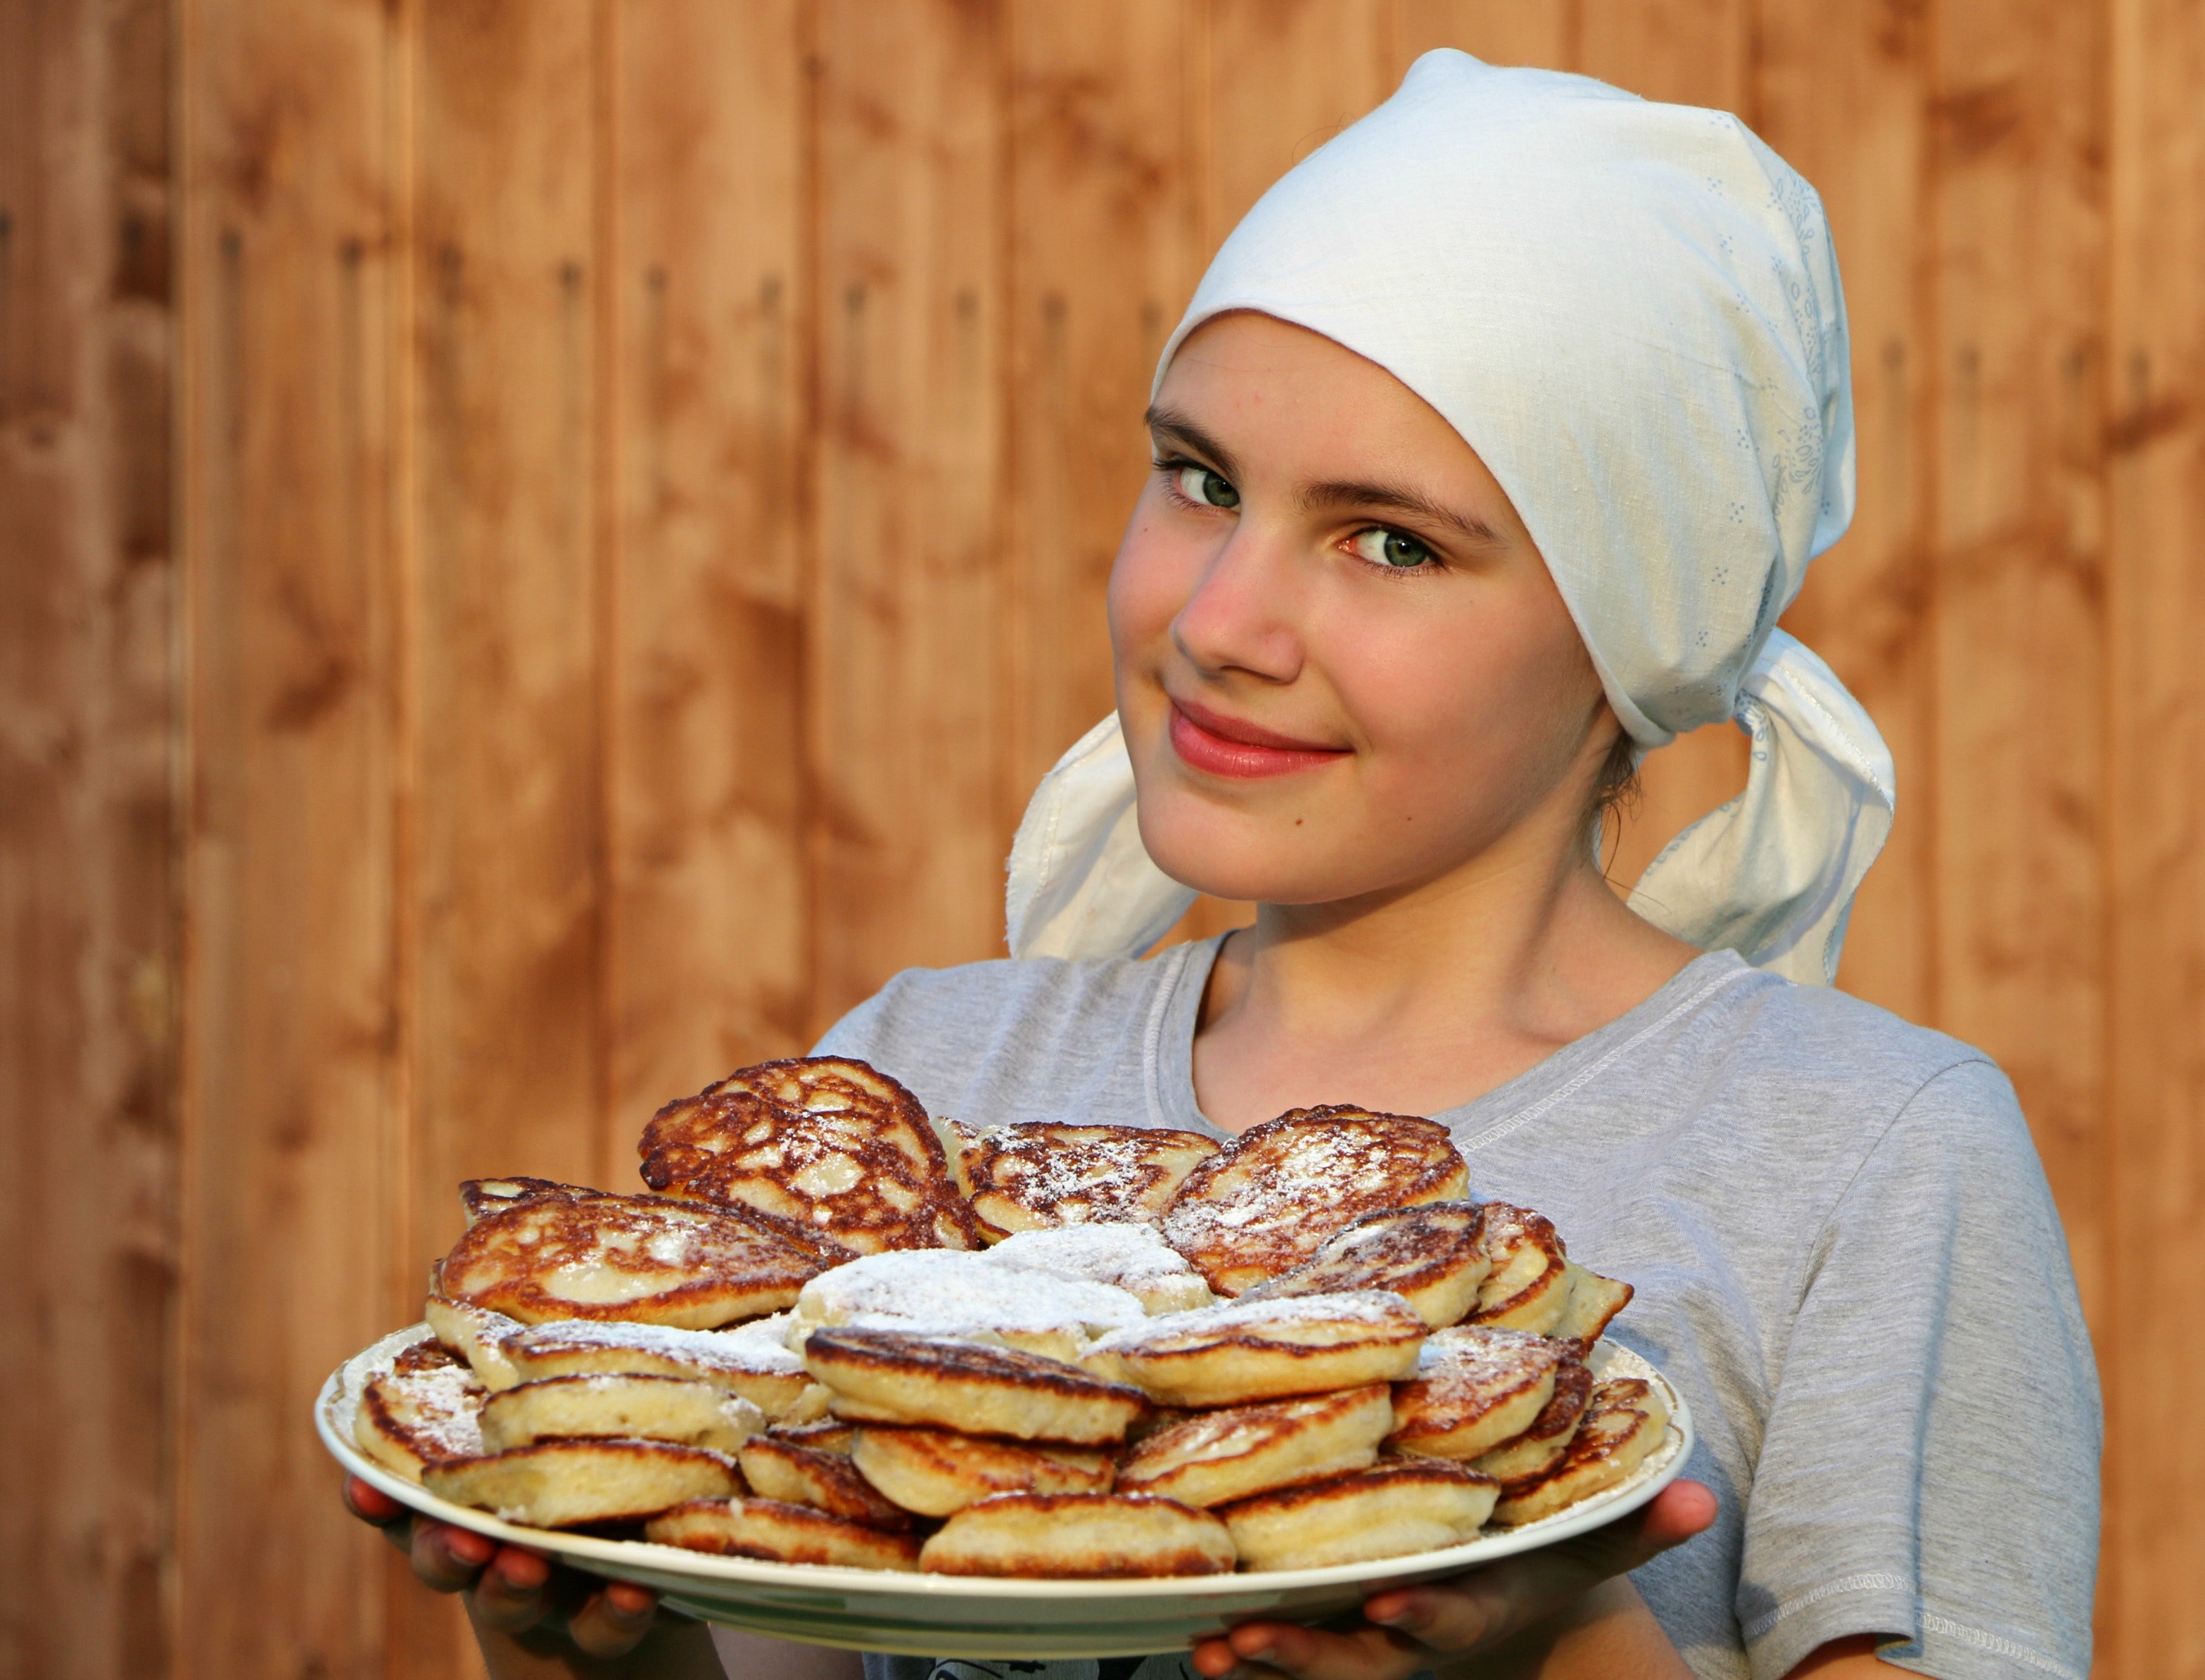 Woman in grey crew neck shirt holding a white ceramic plate with pancakes photo